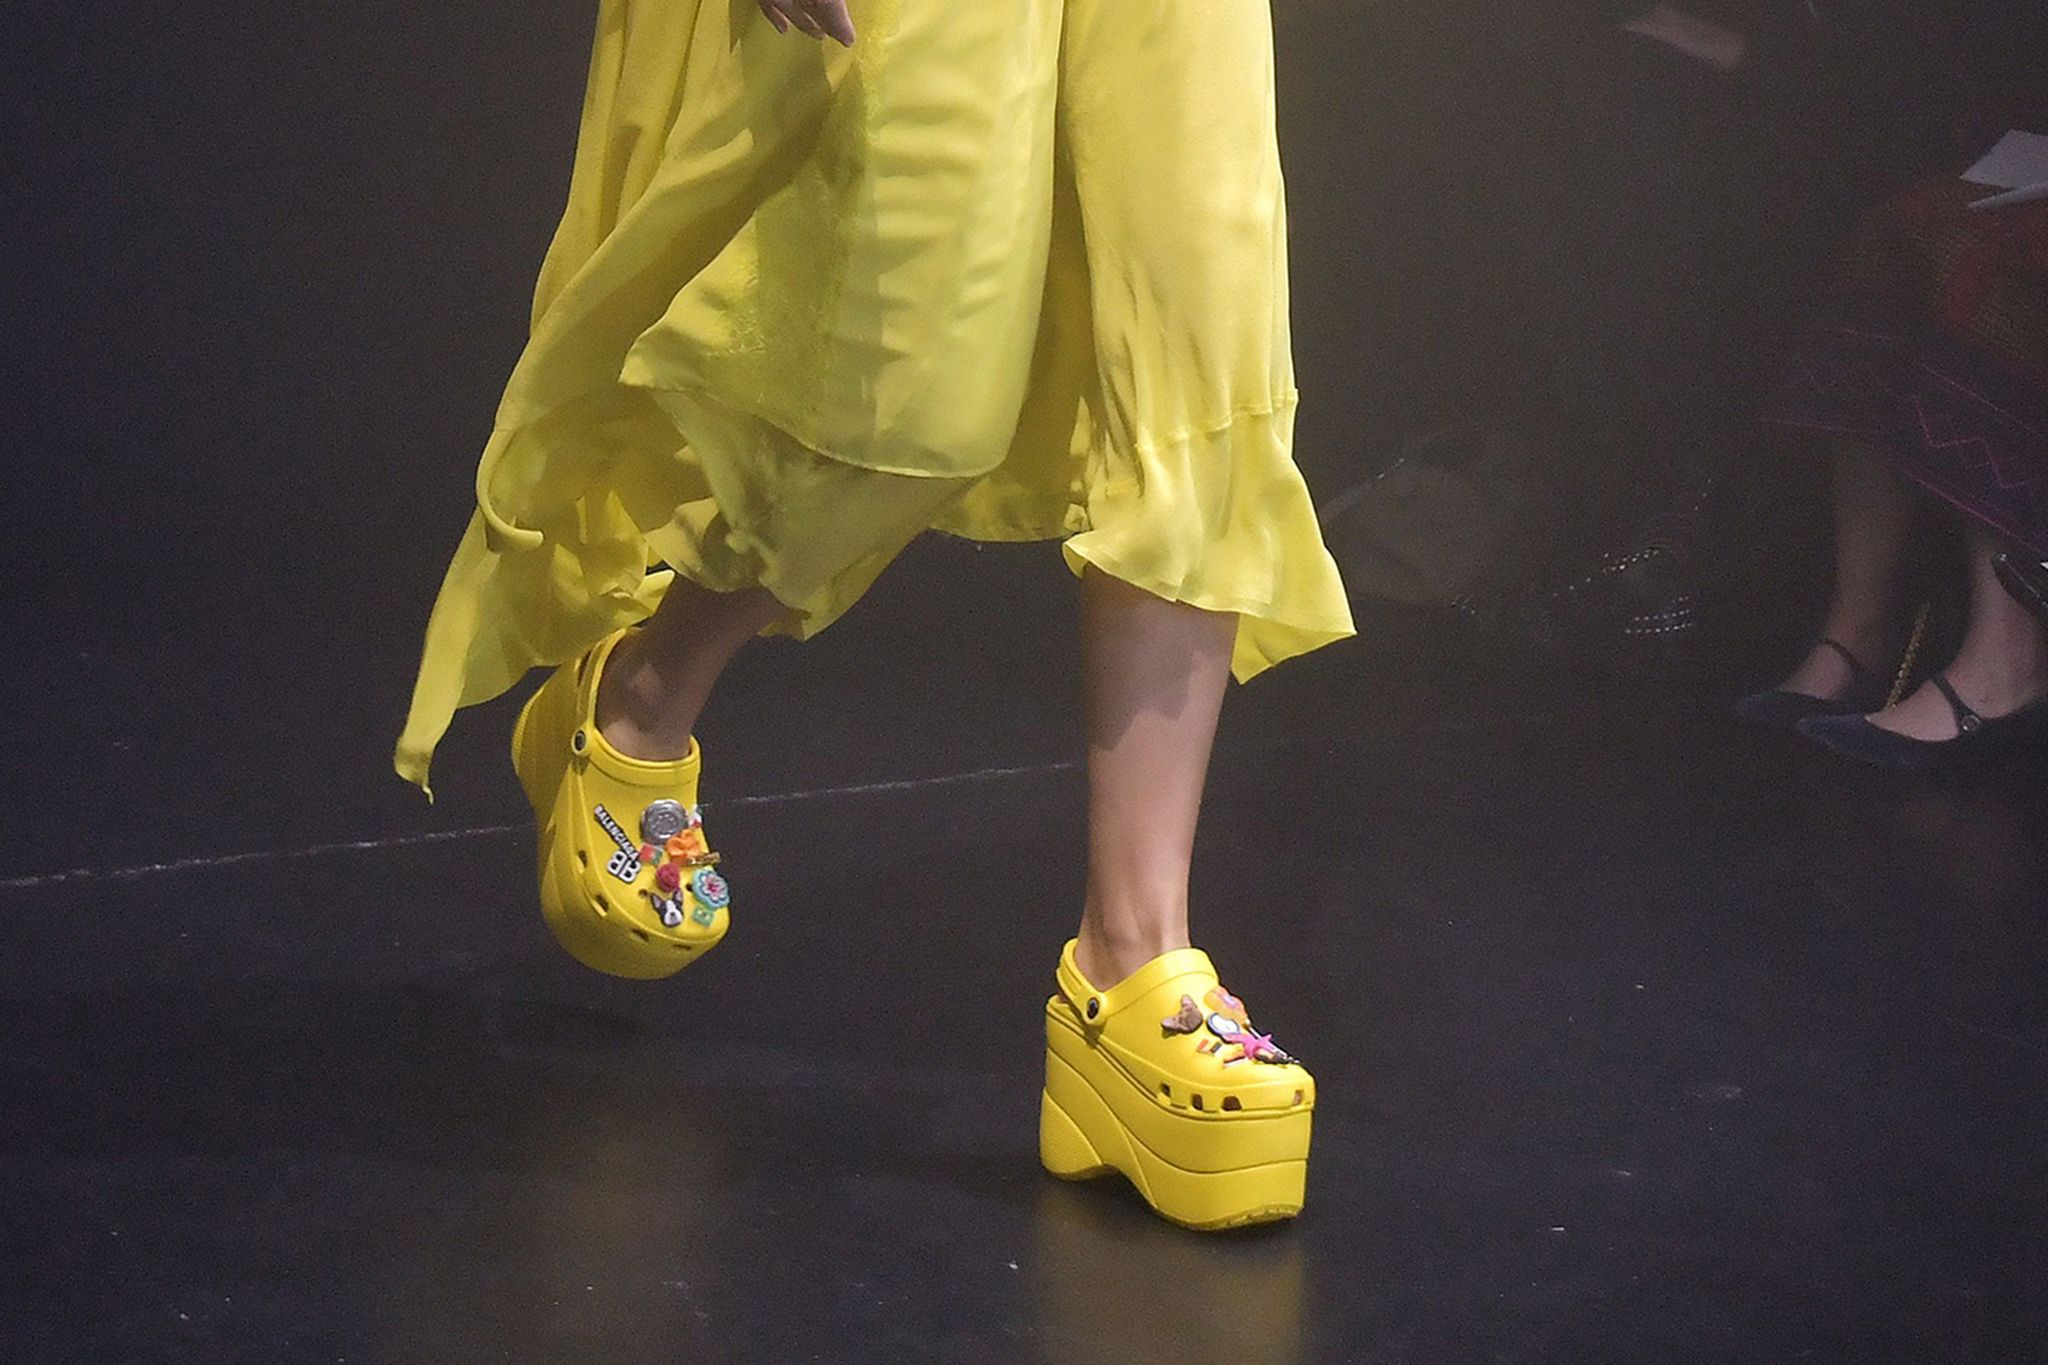 Caius Odds Holde Balenciaga's £600 platform Crocs sold out before they were even released